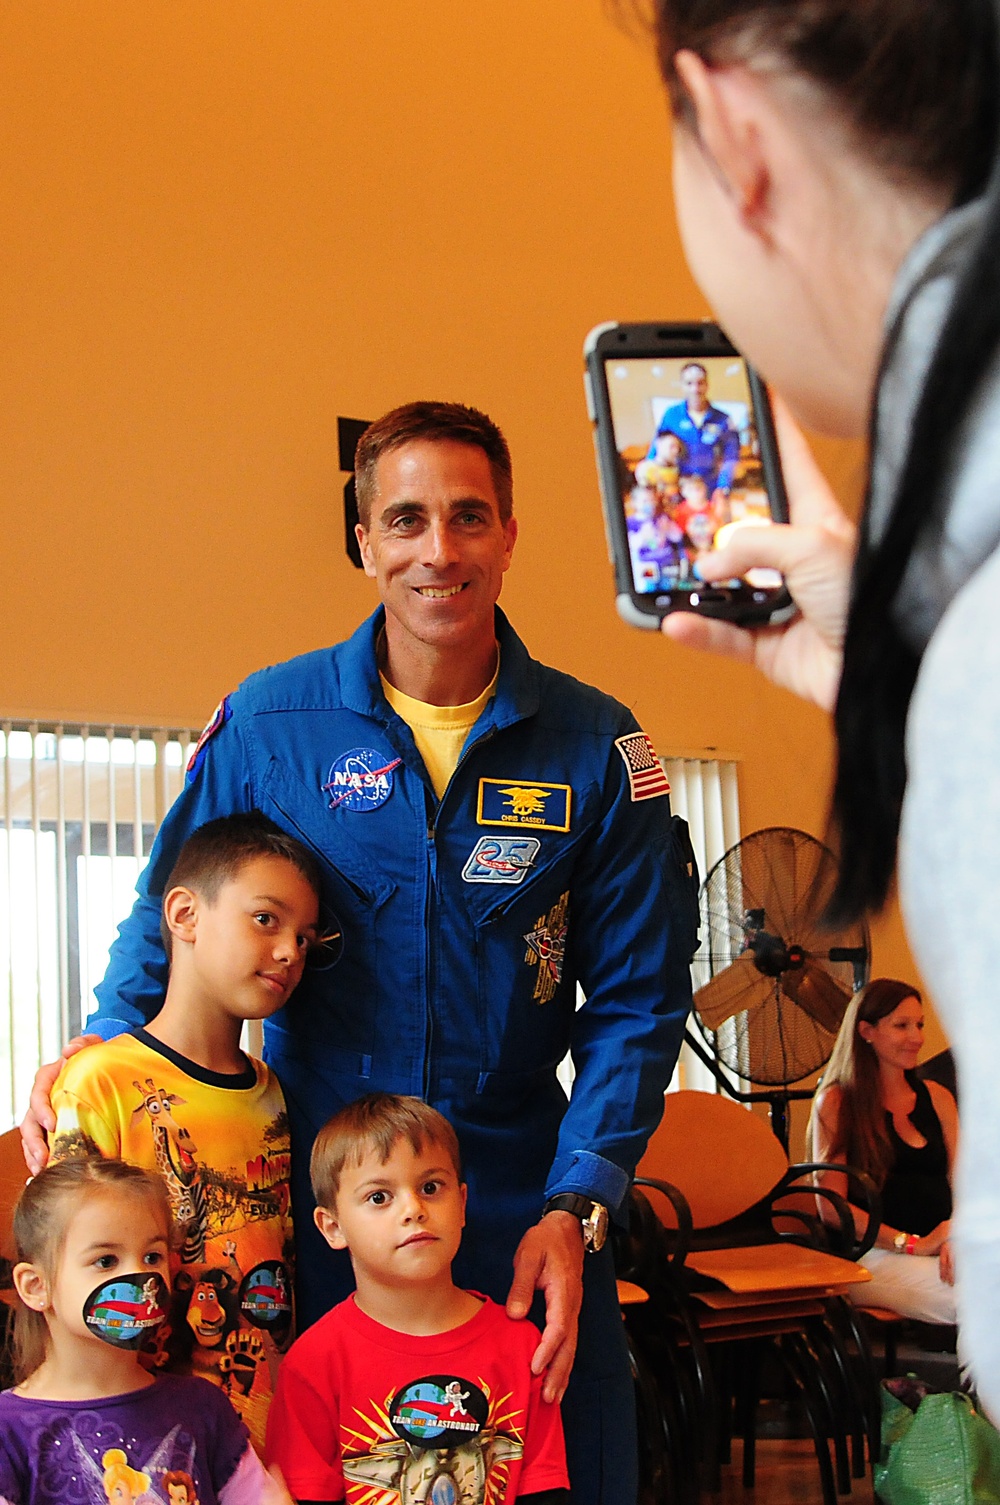 Military families meet Navy SEAL astronaut at exhibit